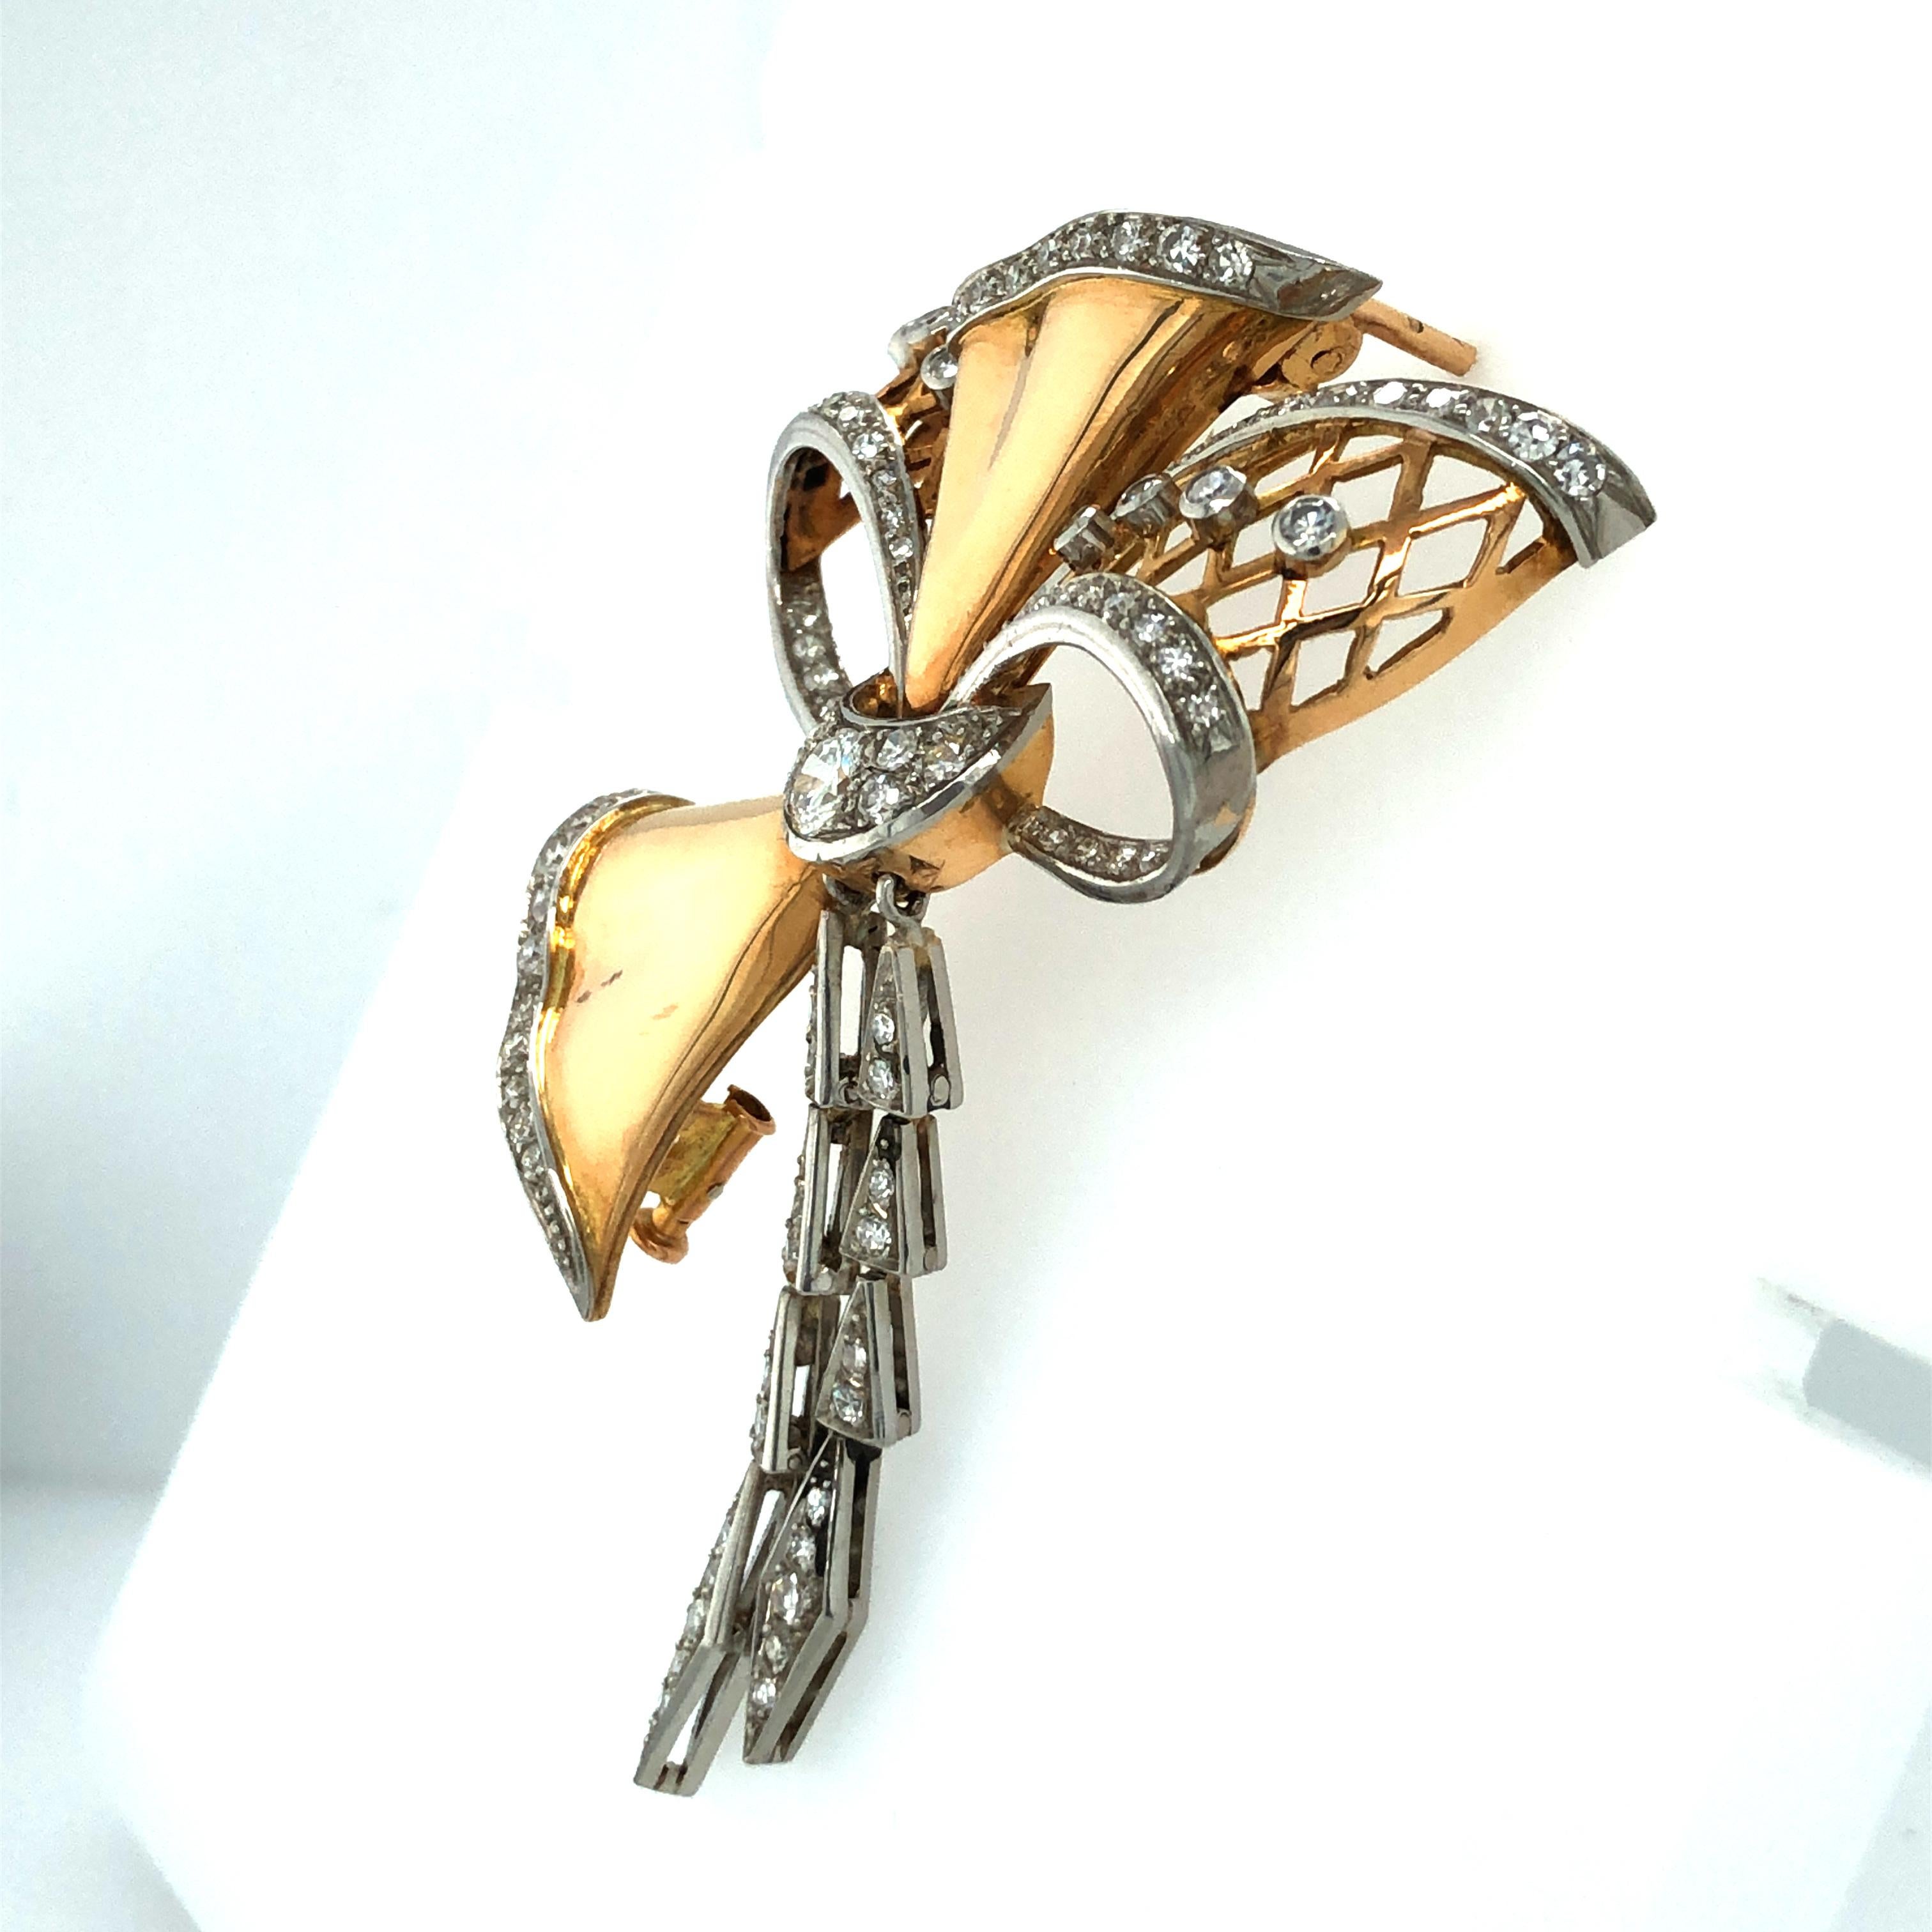 This extravagant yet playful bow brooch from the mid 20th century is crafted in 18 karat rose gold and platinum 950.
The centre part is set with a brilliant-cut diamond of approximately 0.35 carats, H/I colour and vs clarity. In addition, the